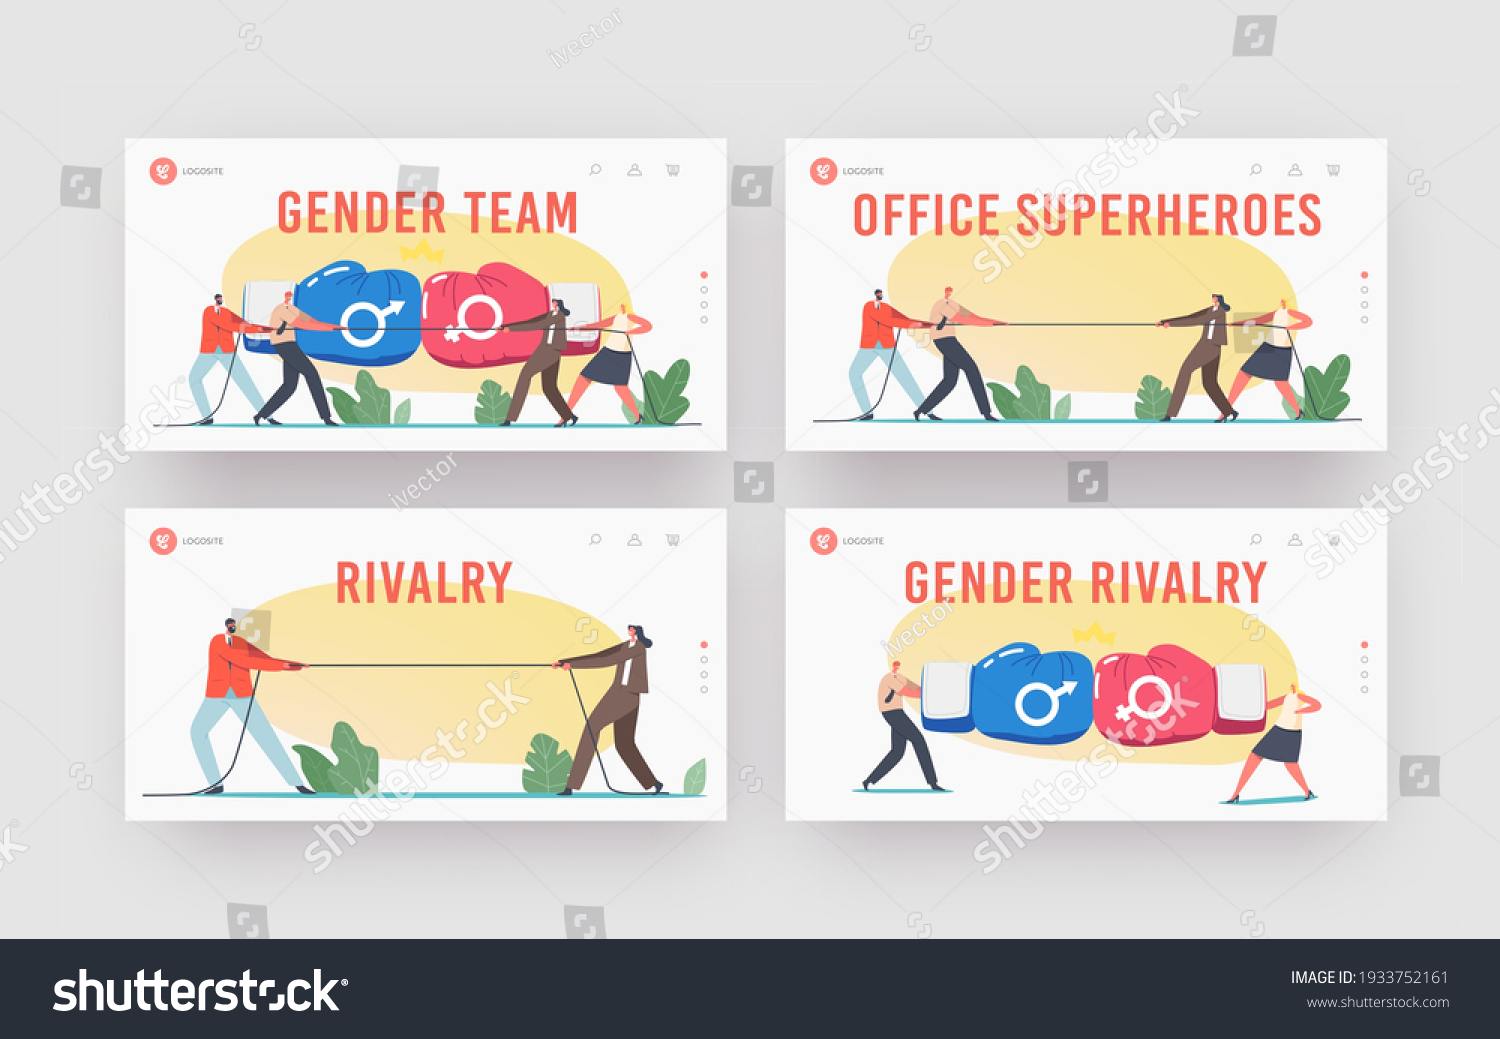 Gender Team Rivalry Office Superheroes Fight Stock Vector Royalty Free 1933752161 Shutterstock 